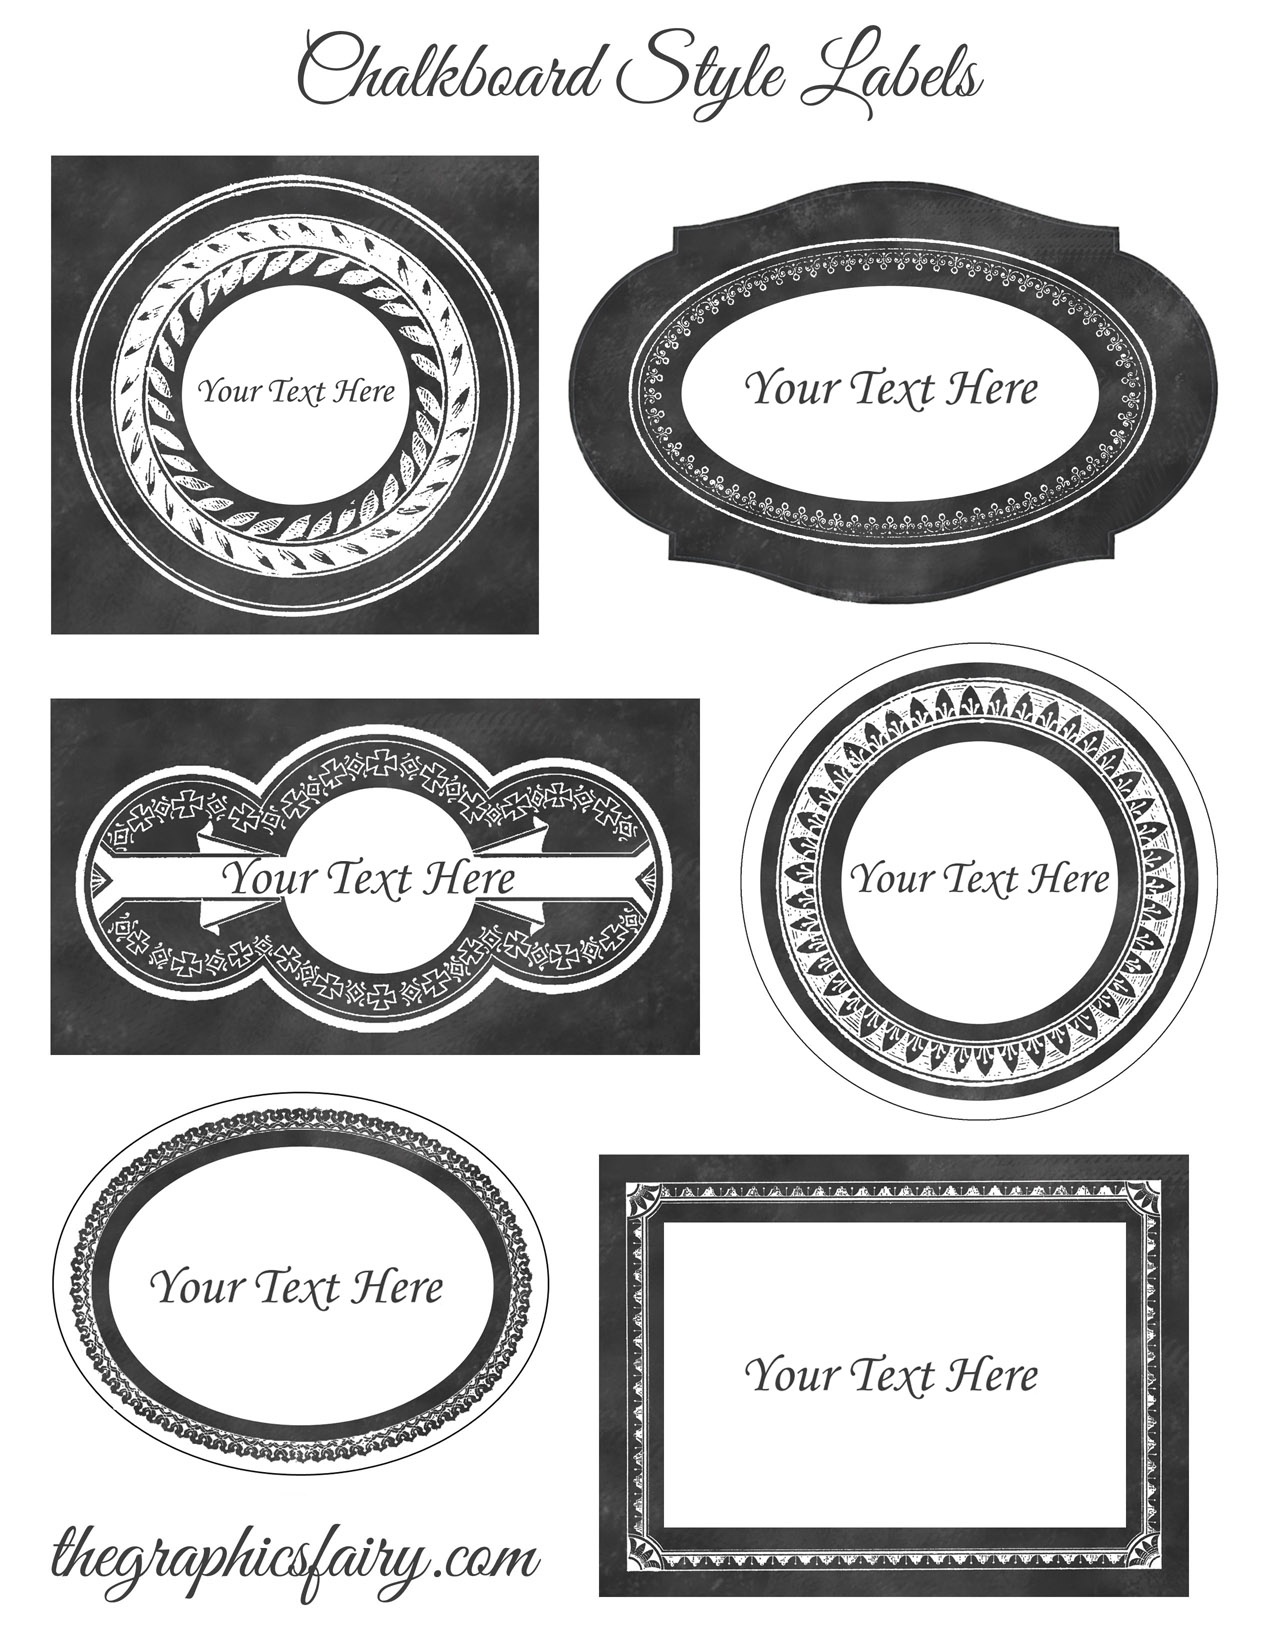 Chalkboard Style Printable Labels - Editable! - The Graphics Fairy - Free Editable Printable Labels